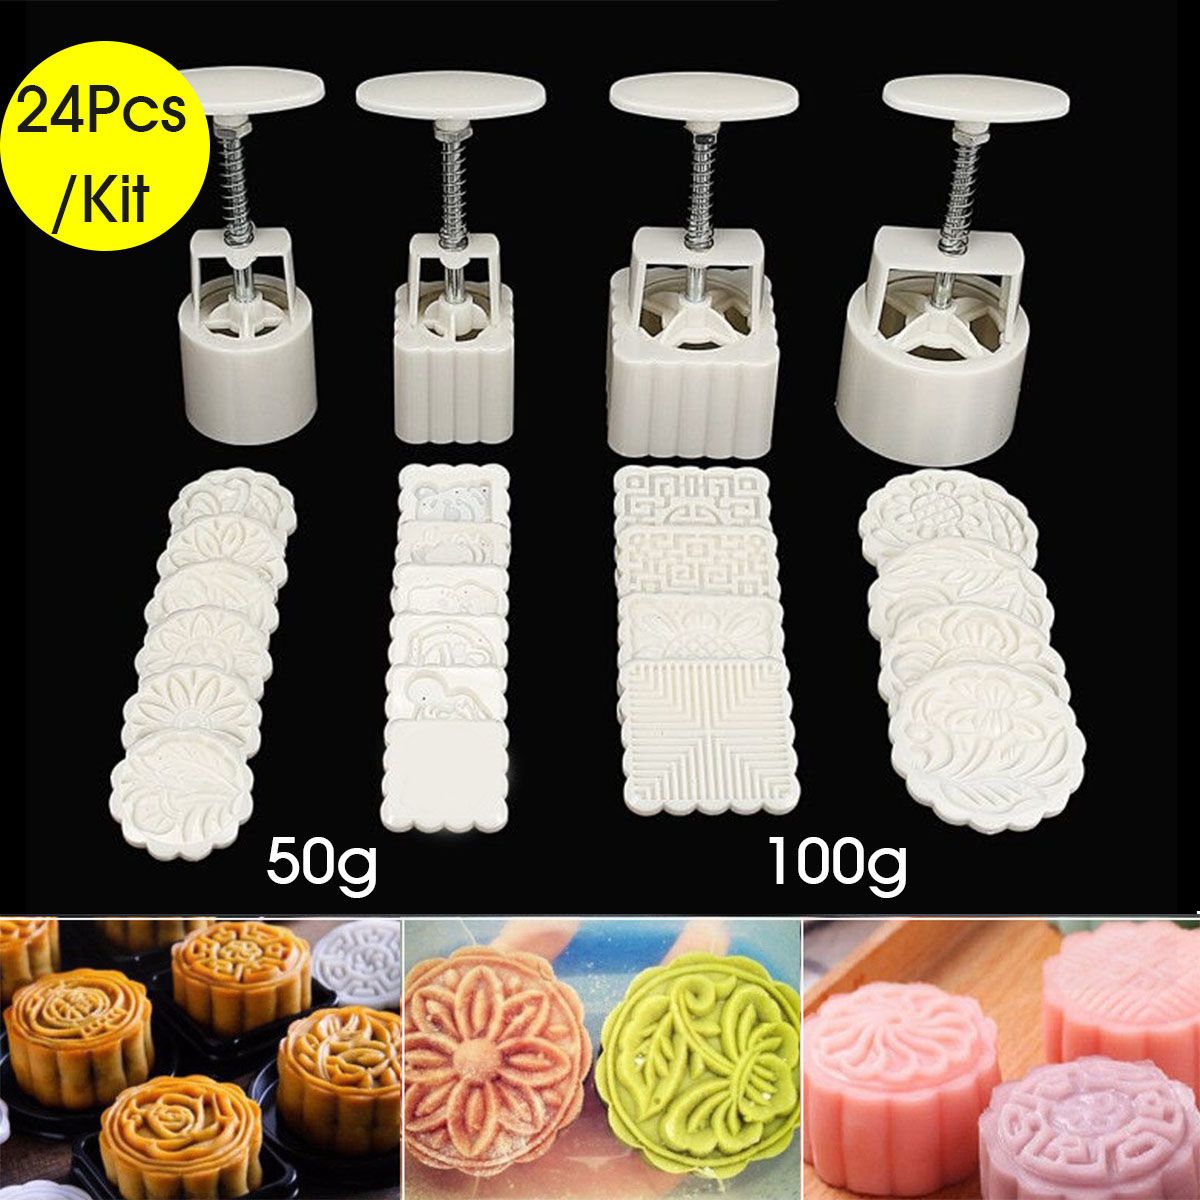 4-Sets-Mooncake-Pastry-Press-Mold-100g-50g-DIY-Flower-Pattern-Mould-Decor-w-20-Stamps-Round-Square-1339031